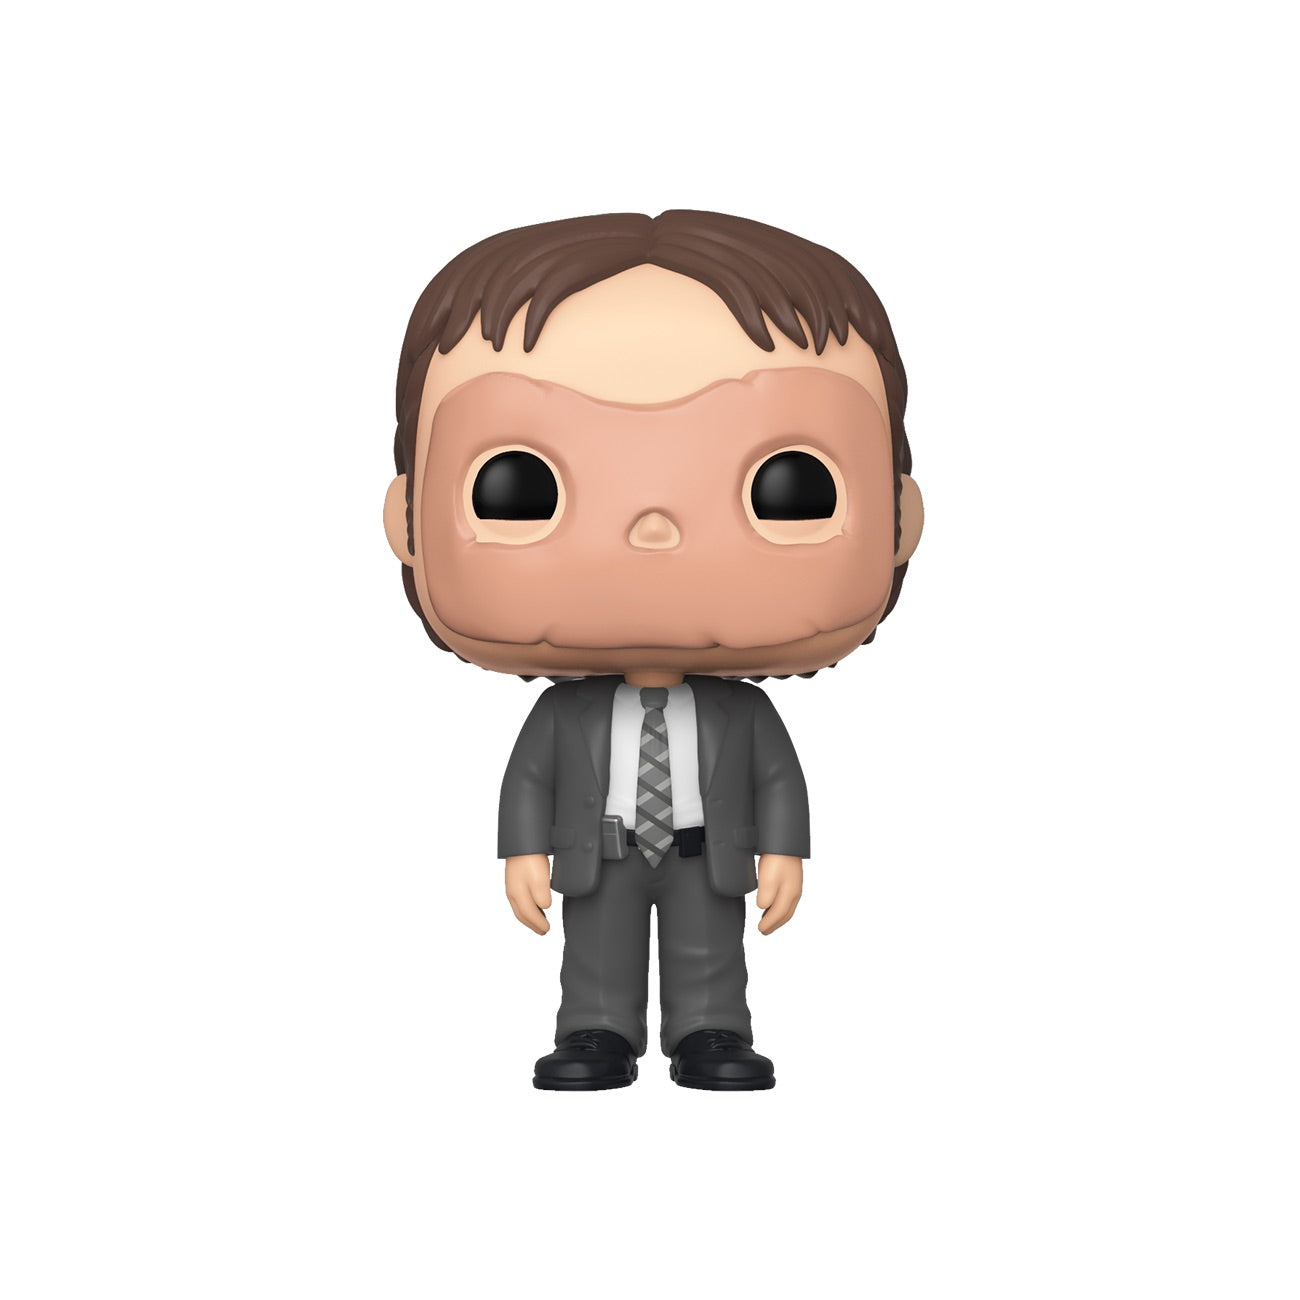 Funko Pop!: The Office - Dwight Schrute [With Mask]